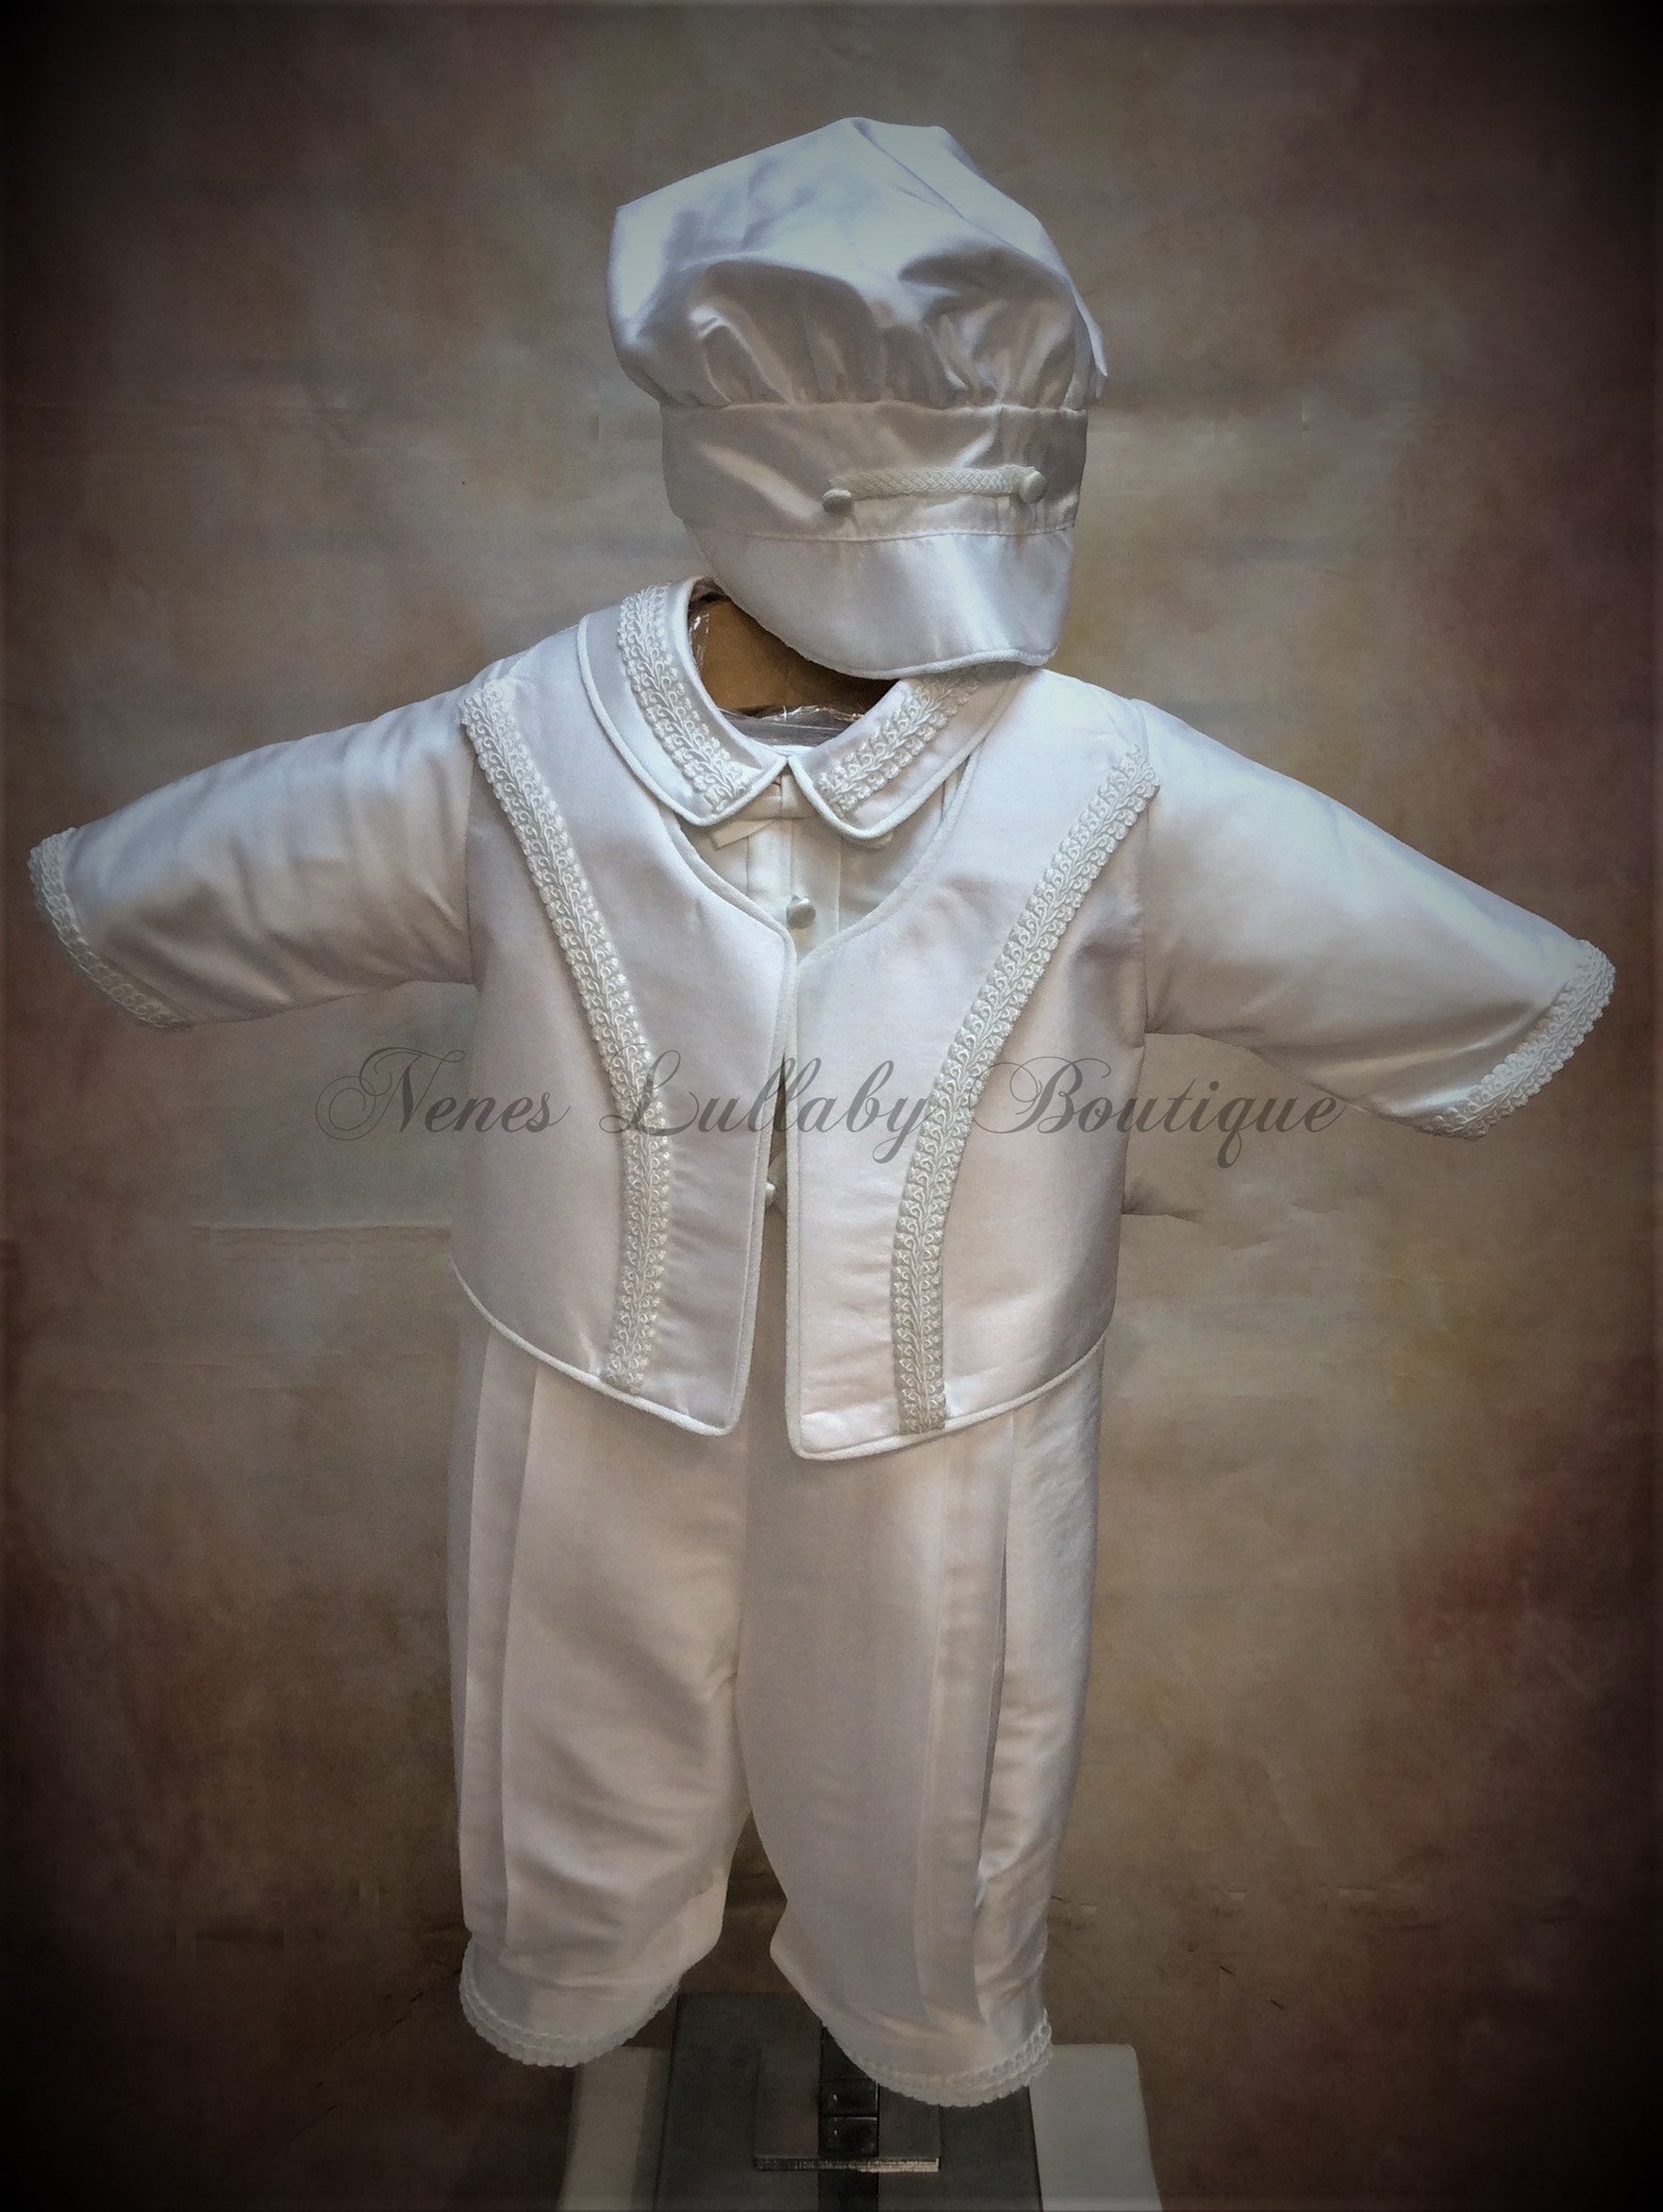 Franco Boys White Silk Christening suit by Piccolo Bacio PB_Franco_ws_lp-Piccolo Bacio Christening-Nenes Lullaby Boutique Inc